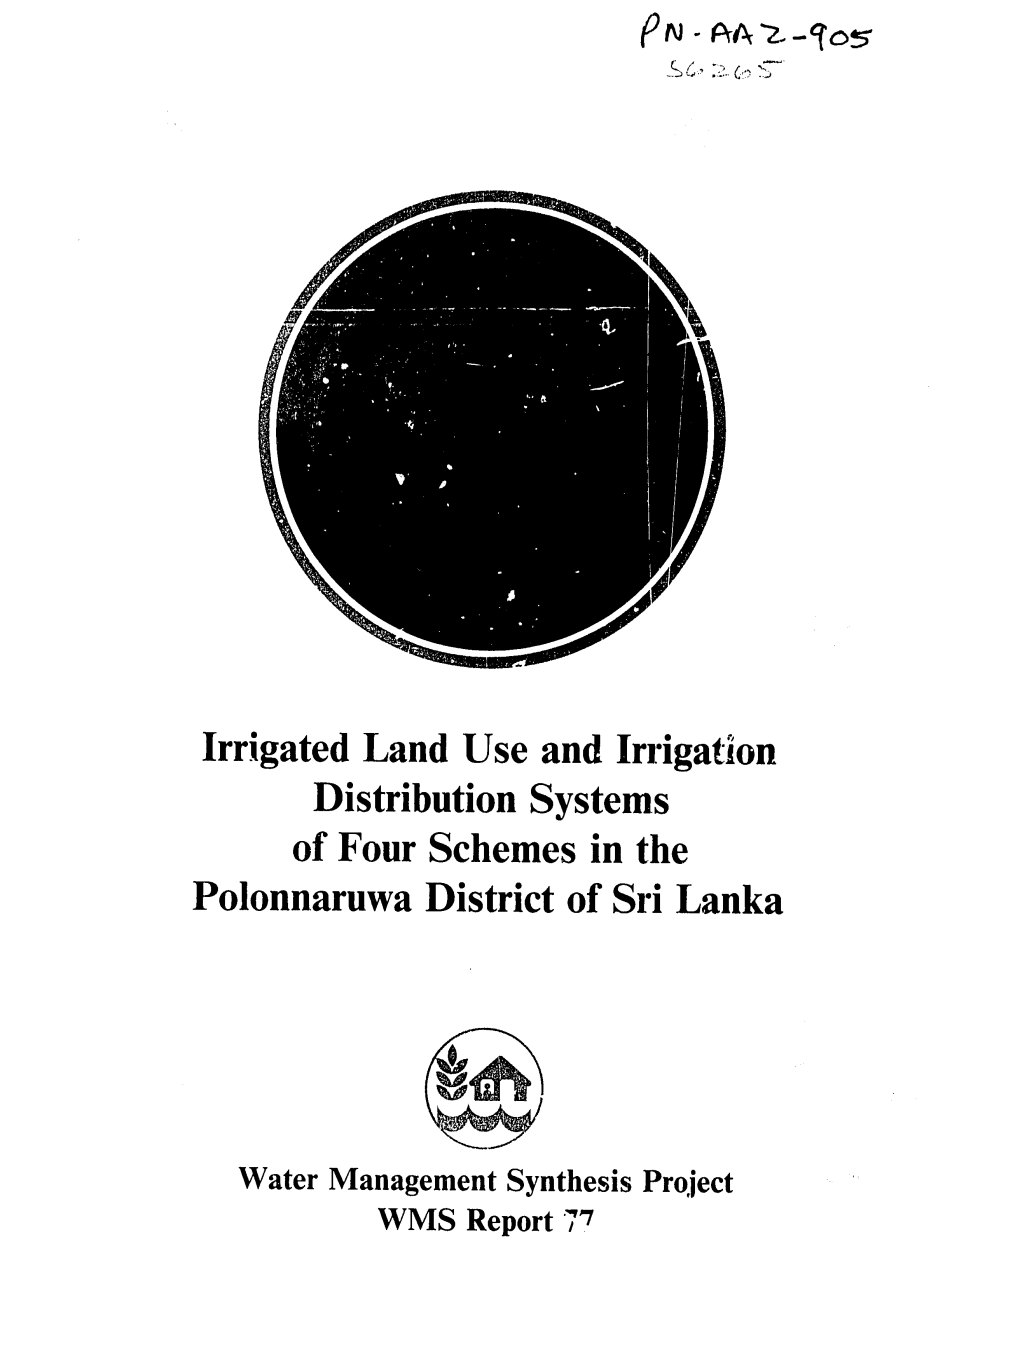 Irrigated Land Use and Irrigation Distribution Systems of Four Schemes in the Polonnaruwa District of Sri Lanka